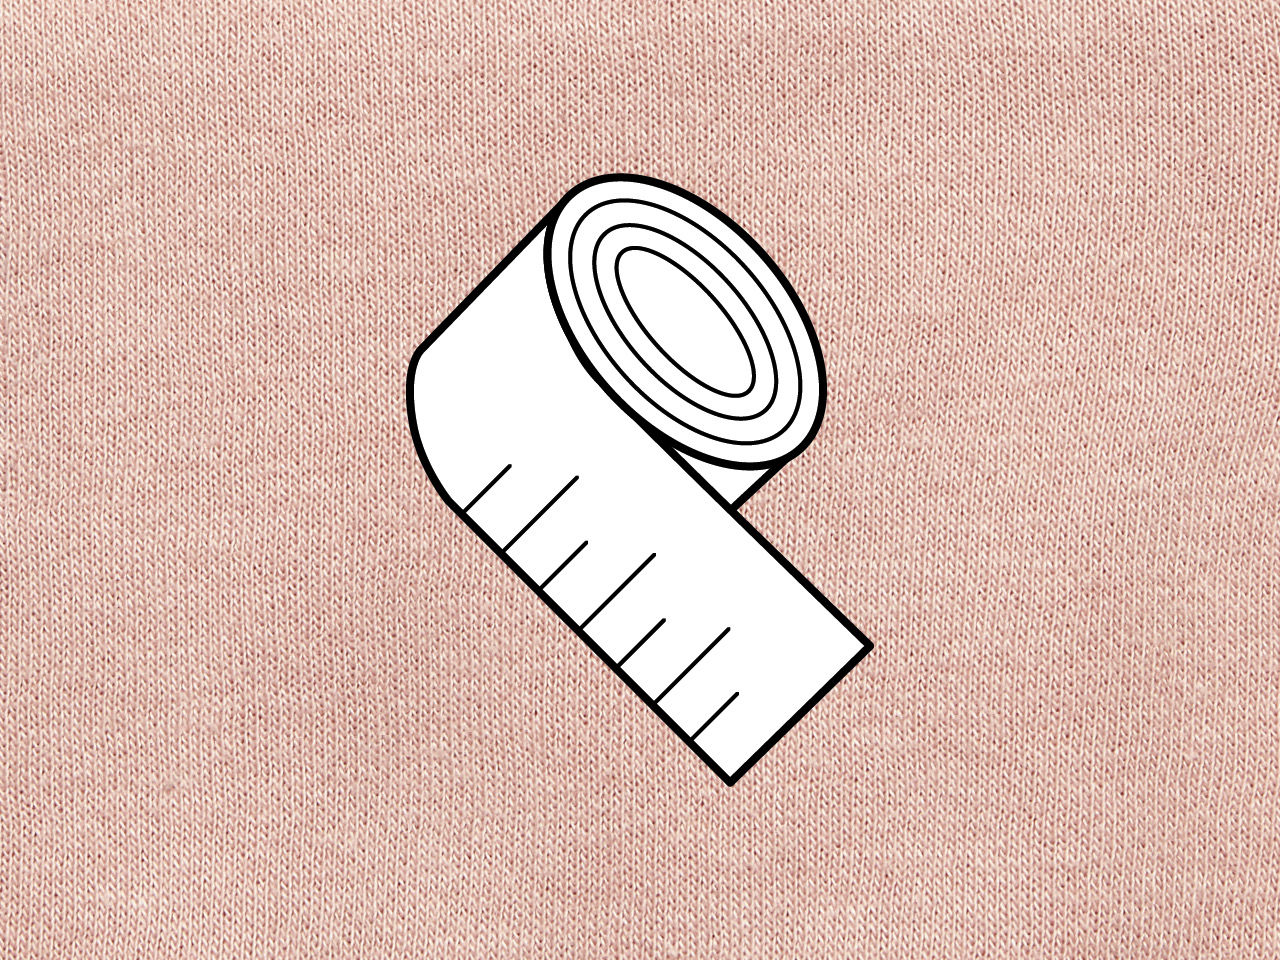 Illustration of a tape measure on a pink cloth background